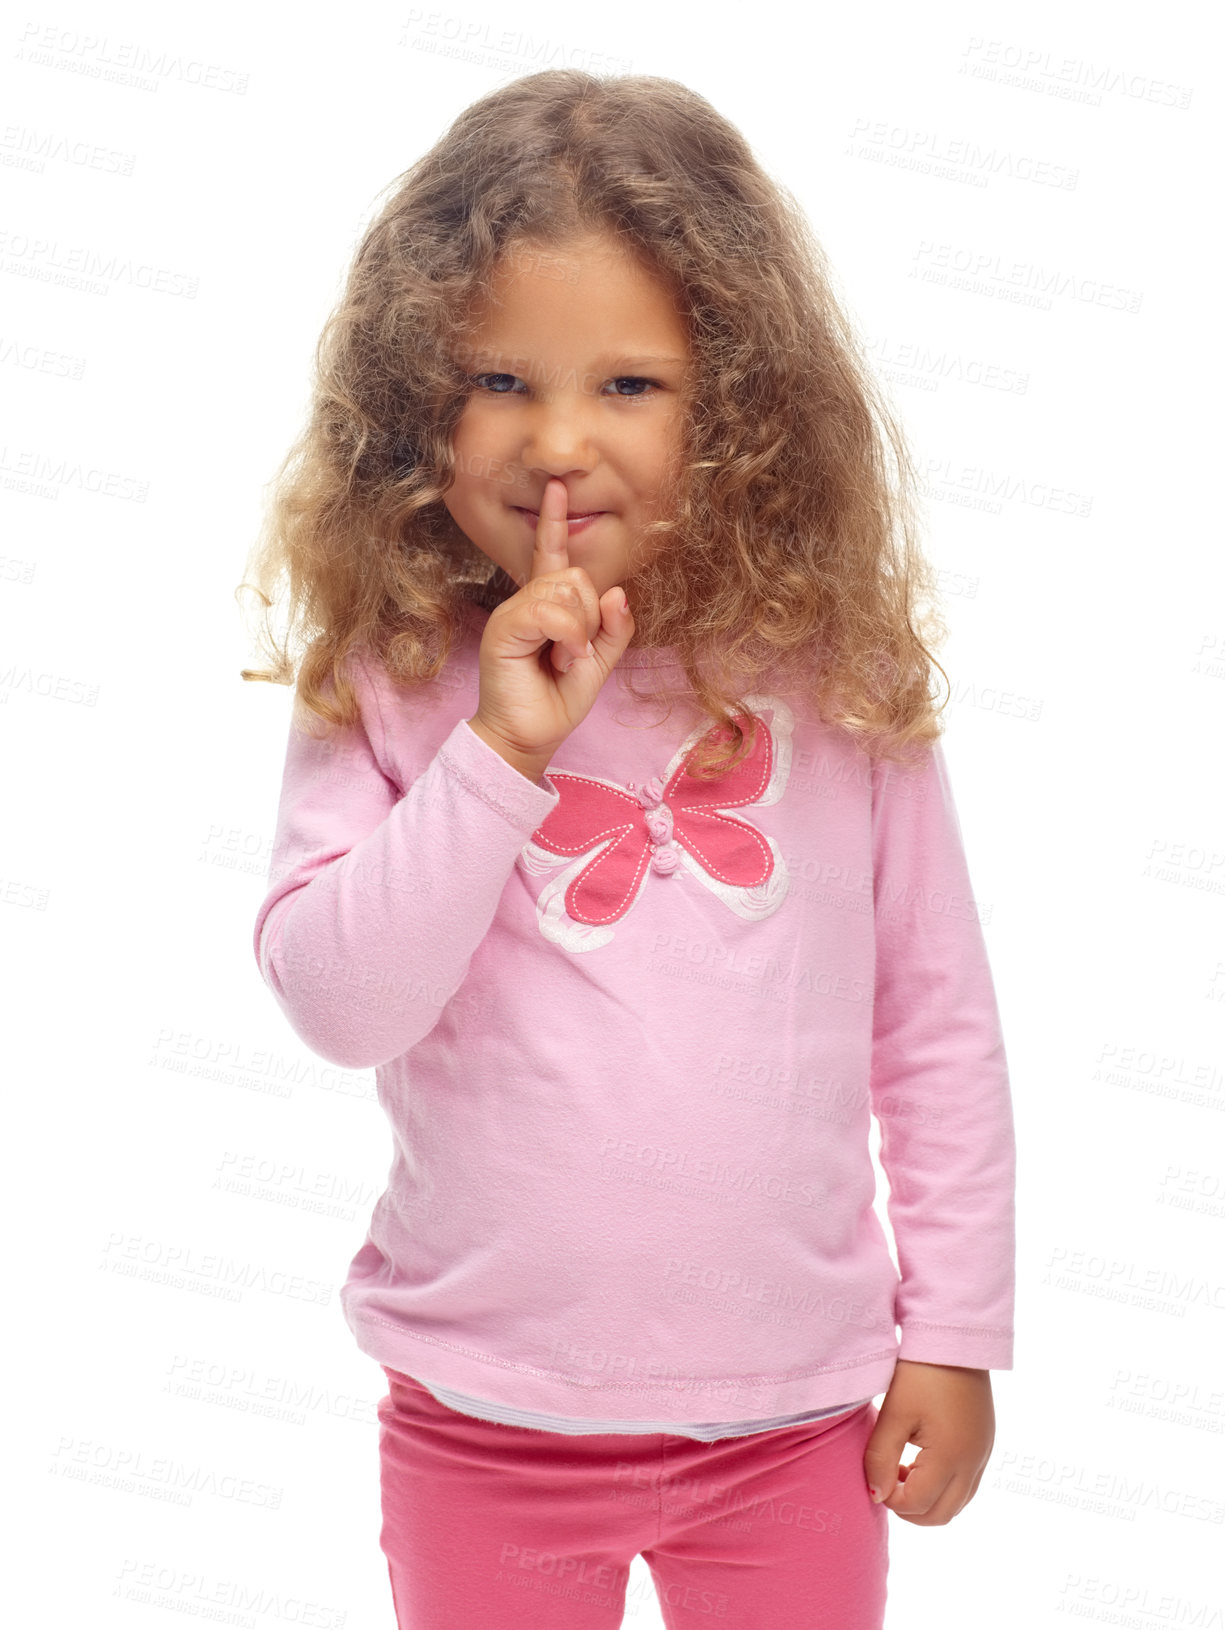 Buy stock photo Cute little girl making a "ssh" gesture against a white background